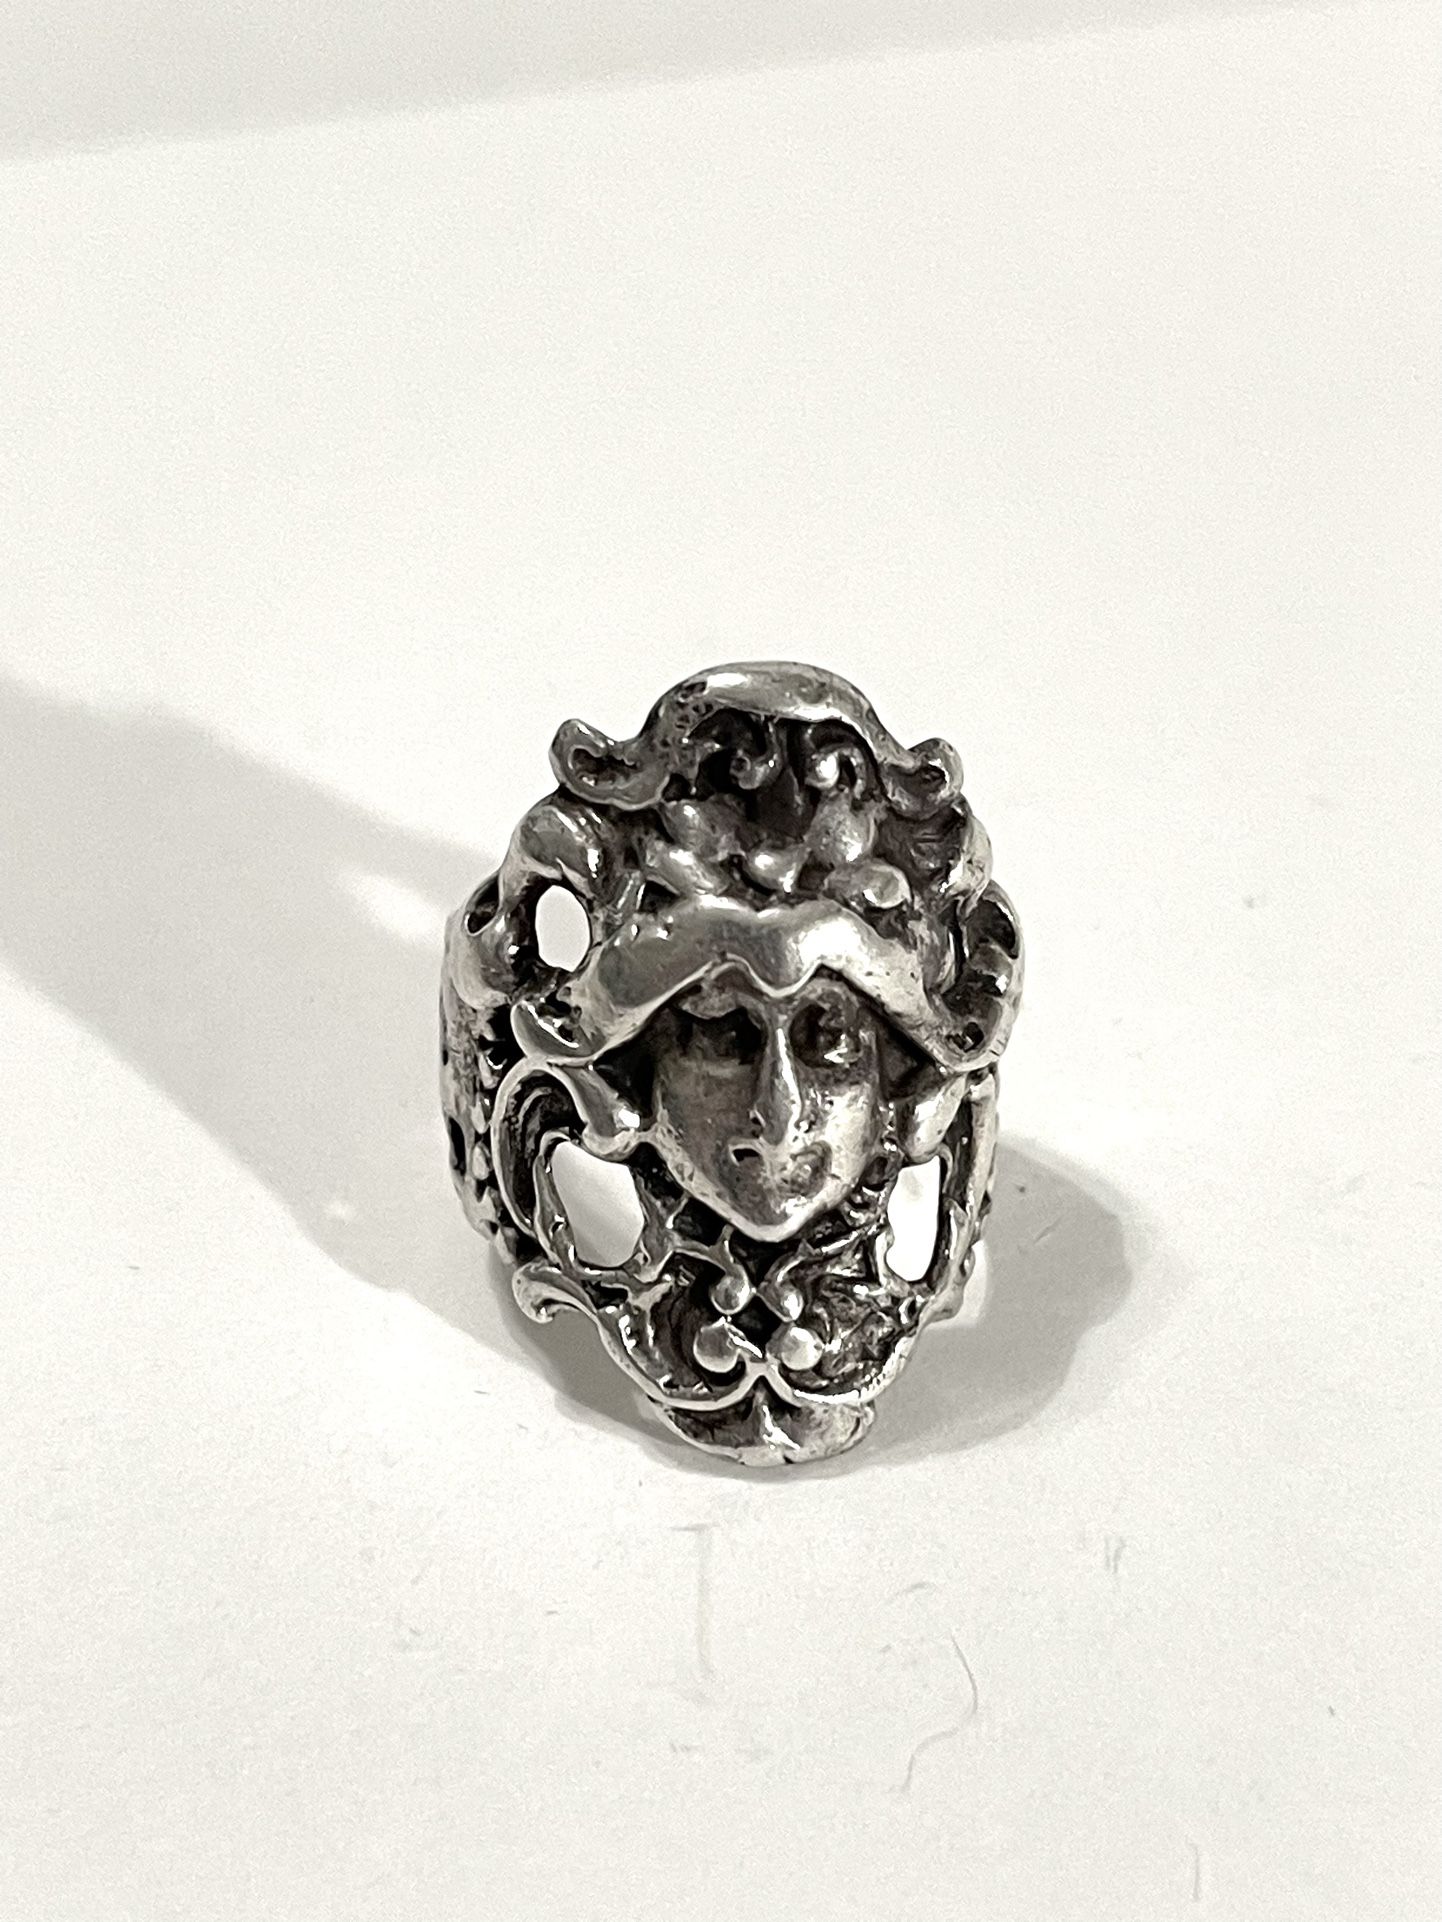 Antique Solid, Silver Handcrafted Ring. Size 6.